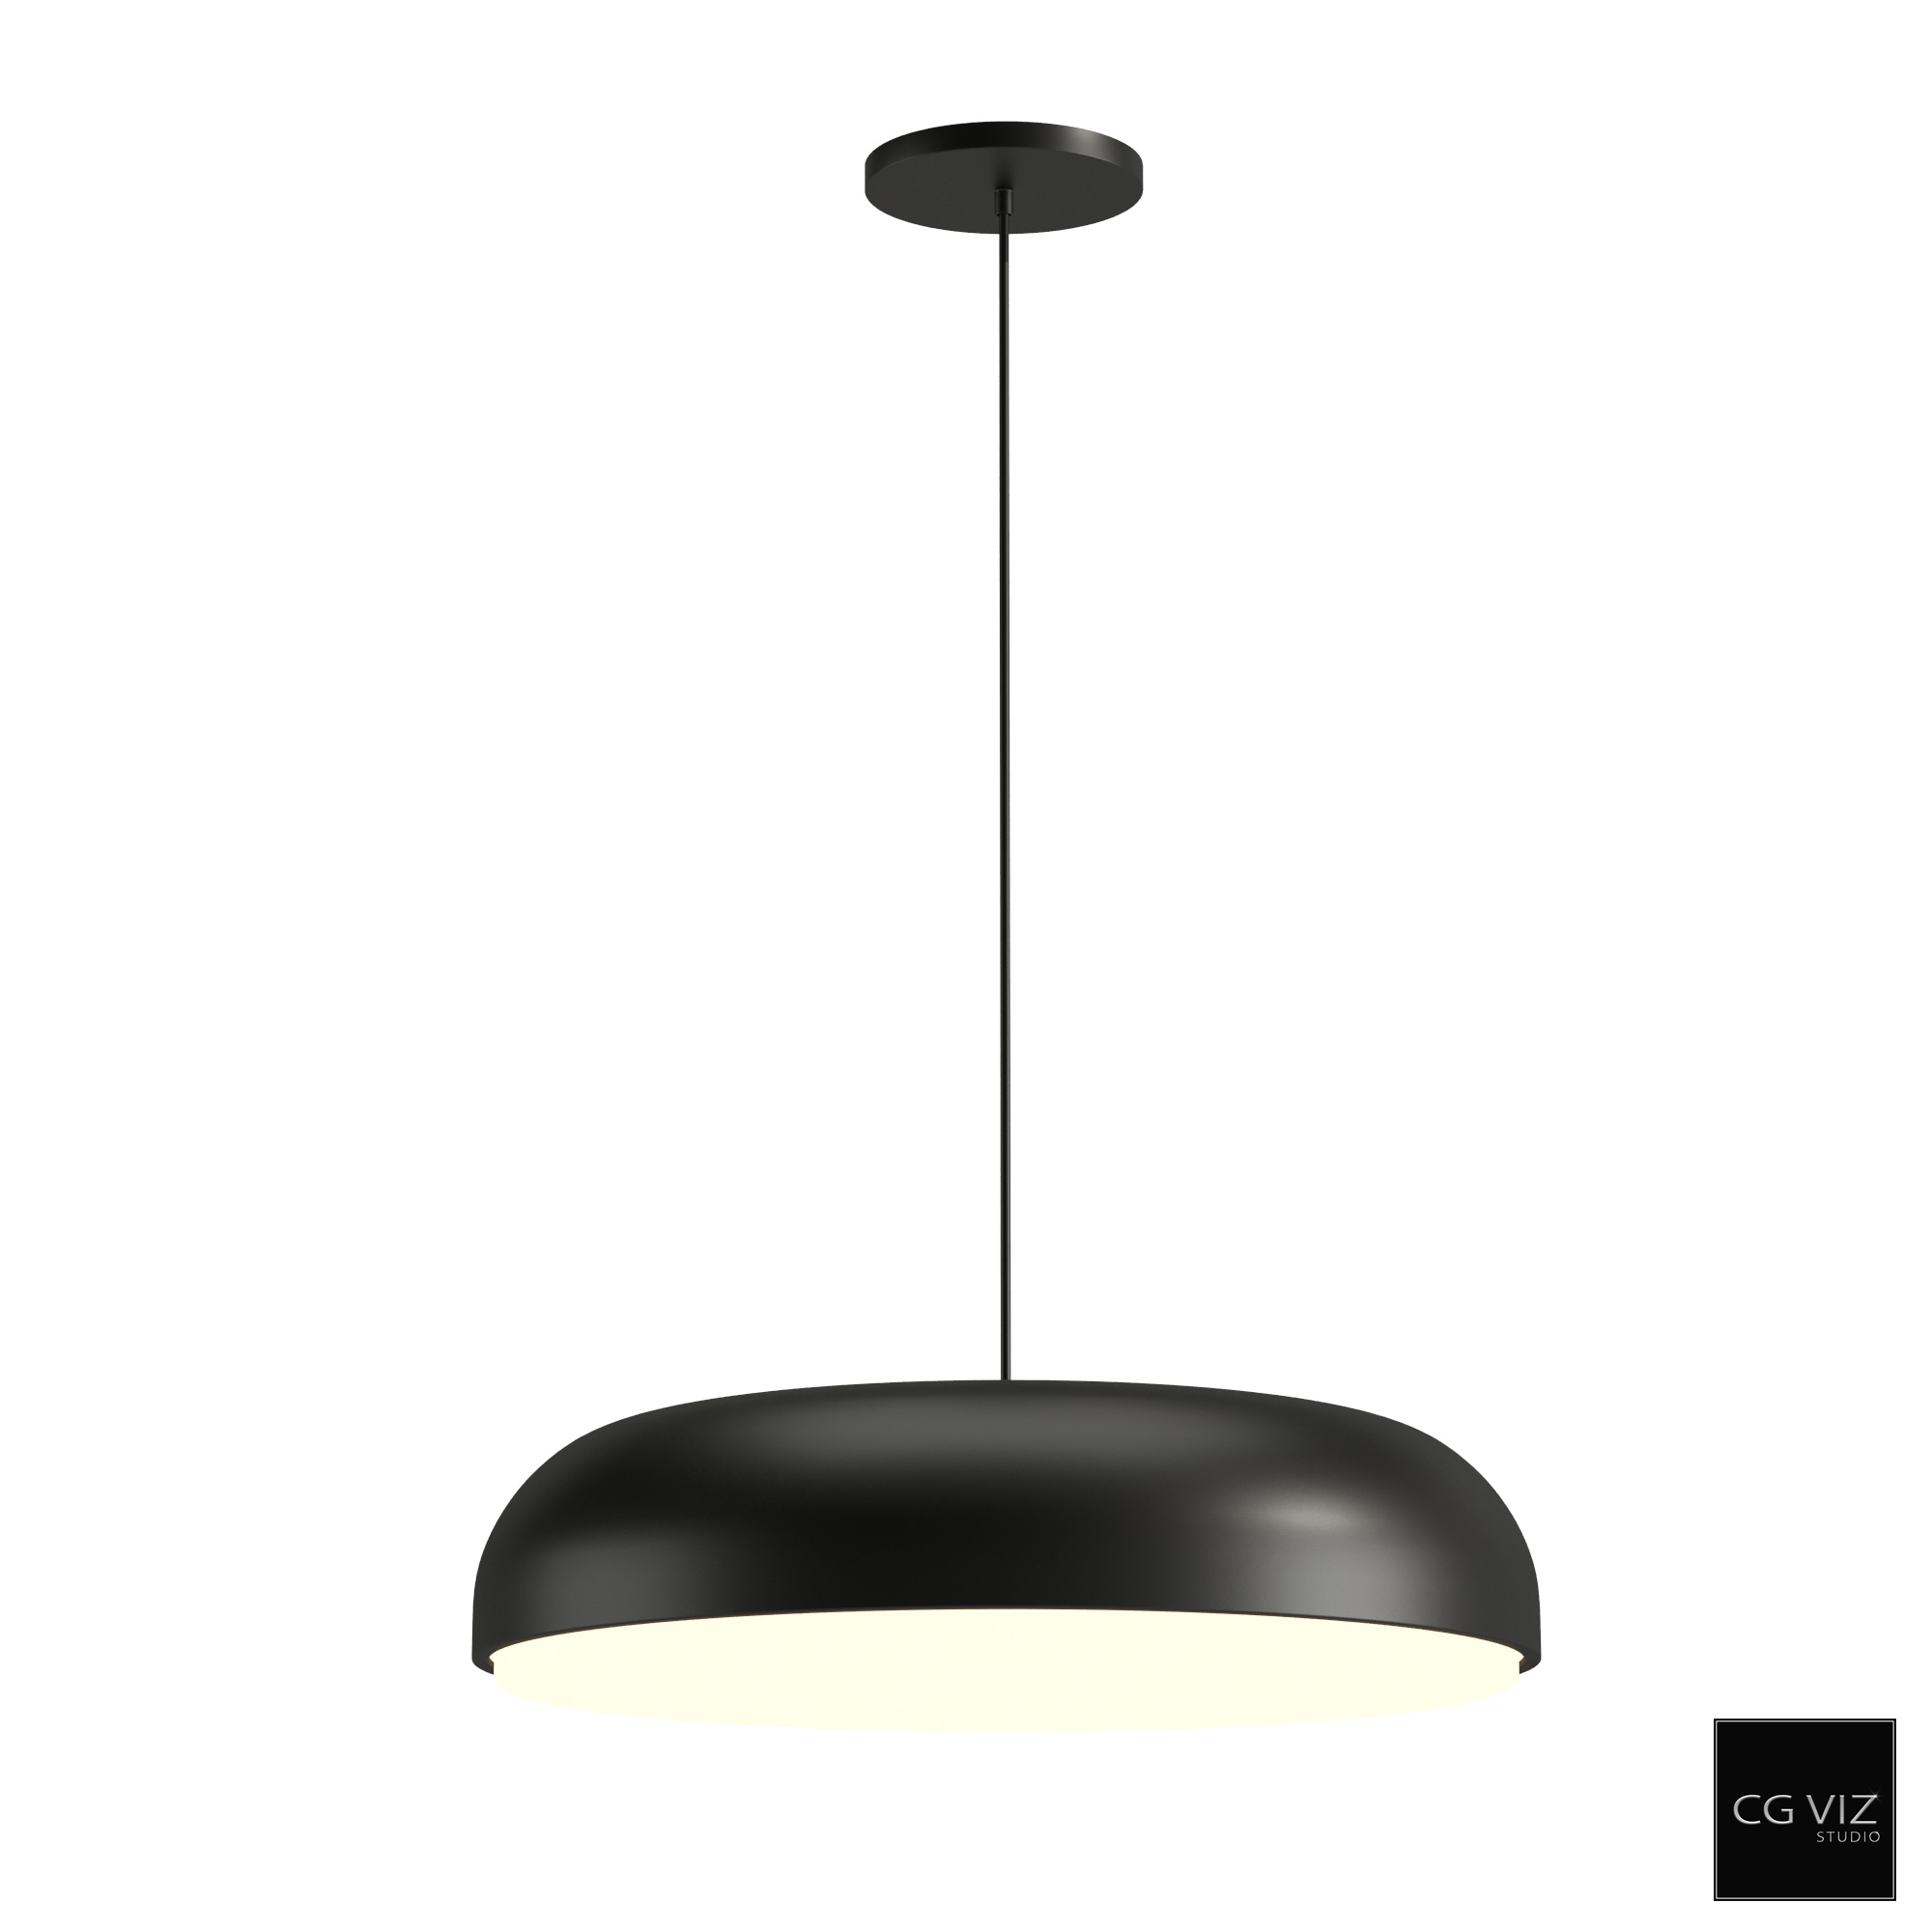 Rendered Preview of Circa Kosa 18 Pendant 3D Model